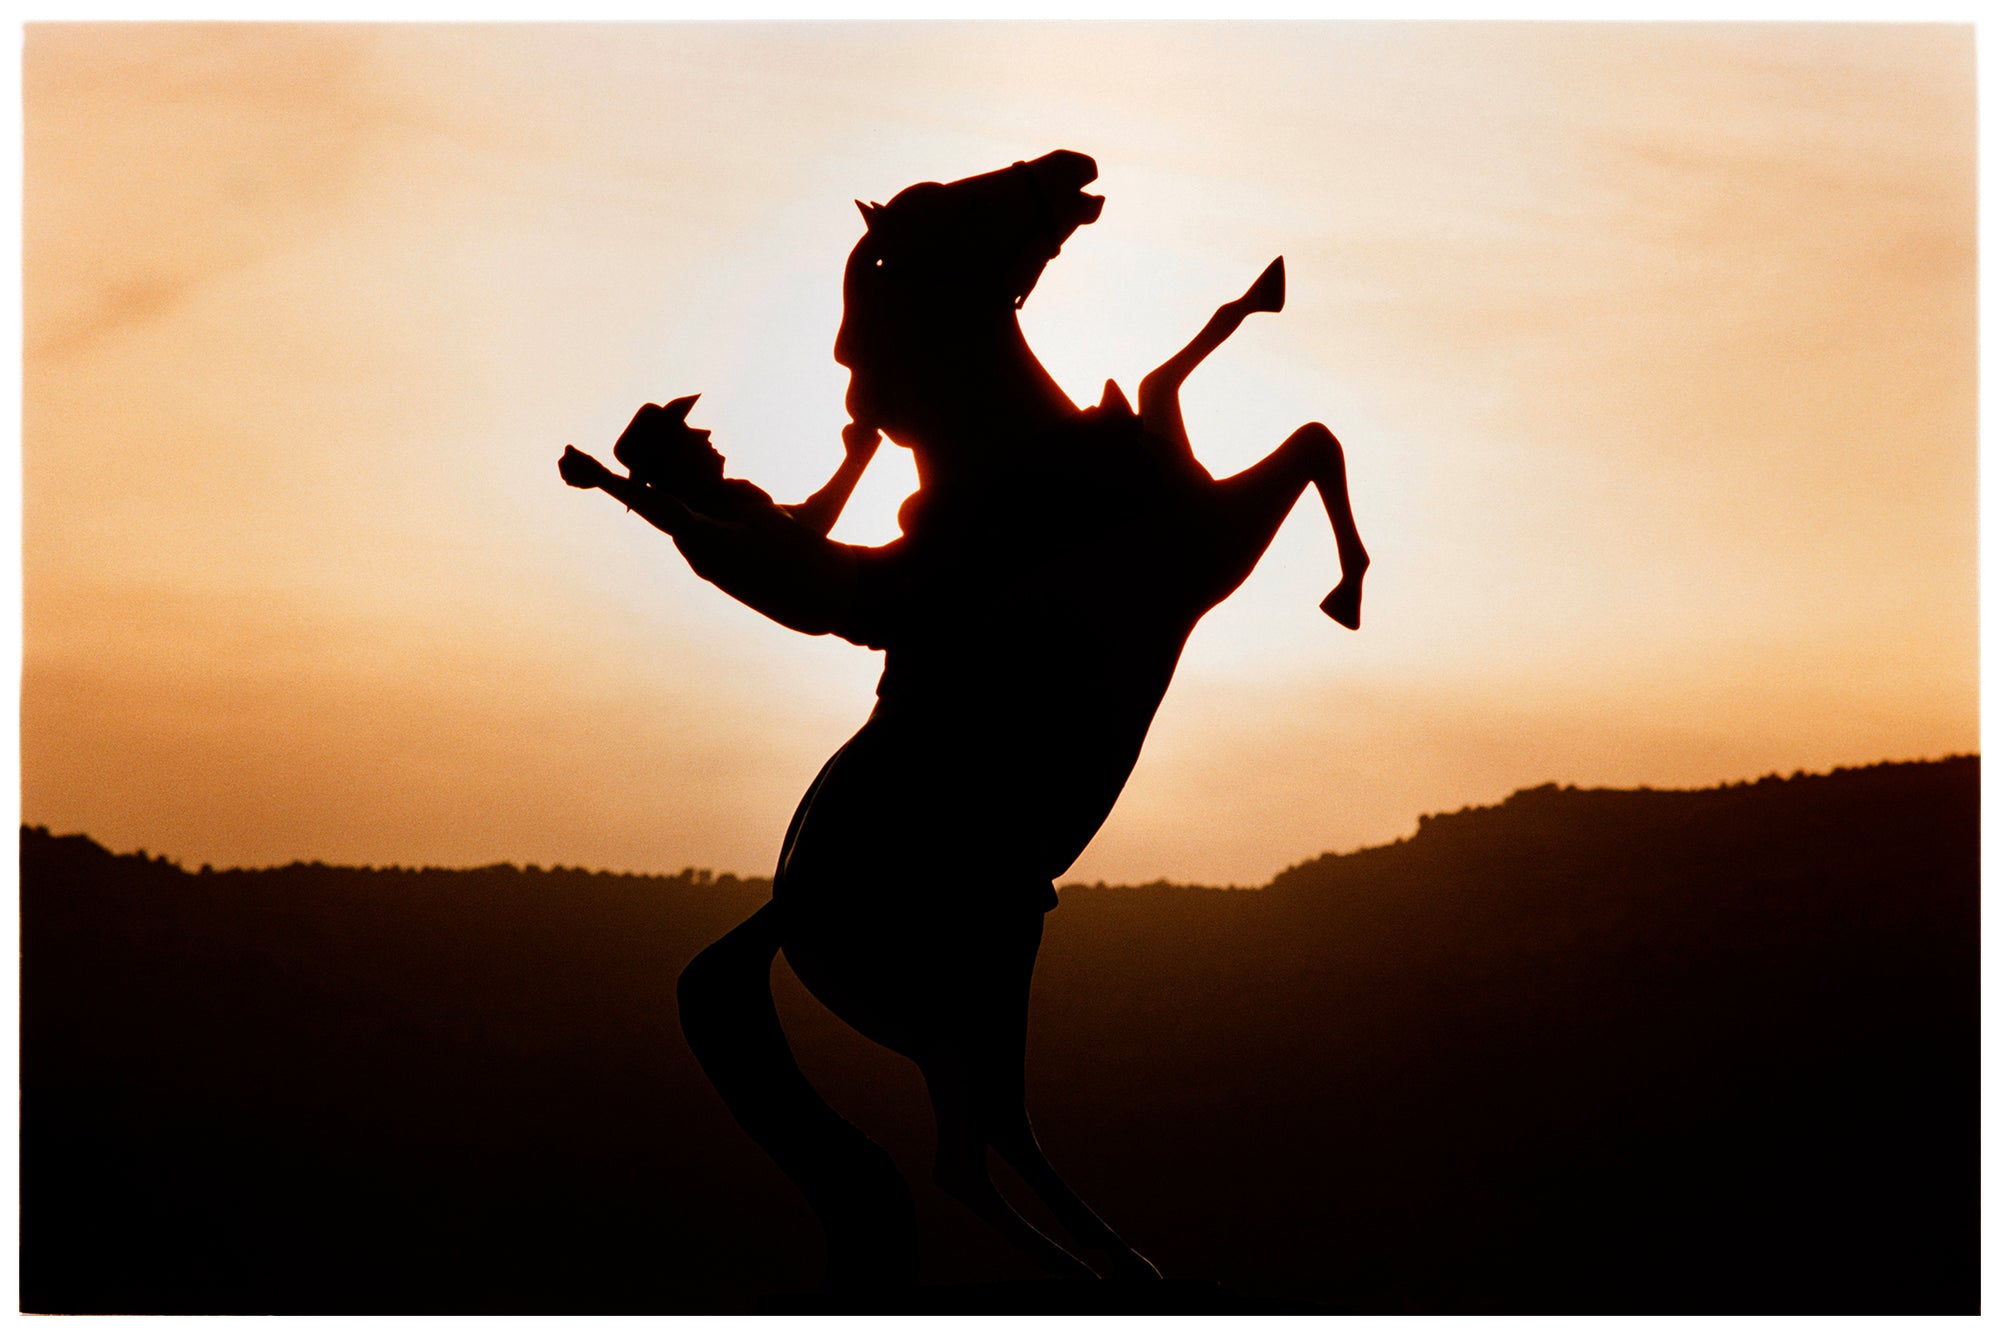 Photograph by Richard Heeps. The photograph shows a sunset and in the middle of the photograph is the silhouette of a statute of a cowboy on his bucking horse with one arm on the reins and the other held high.